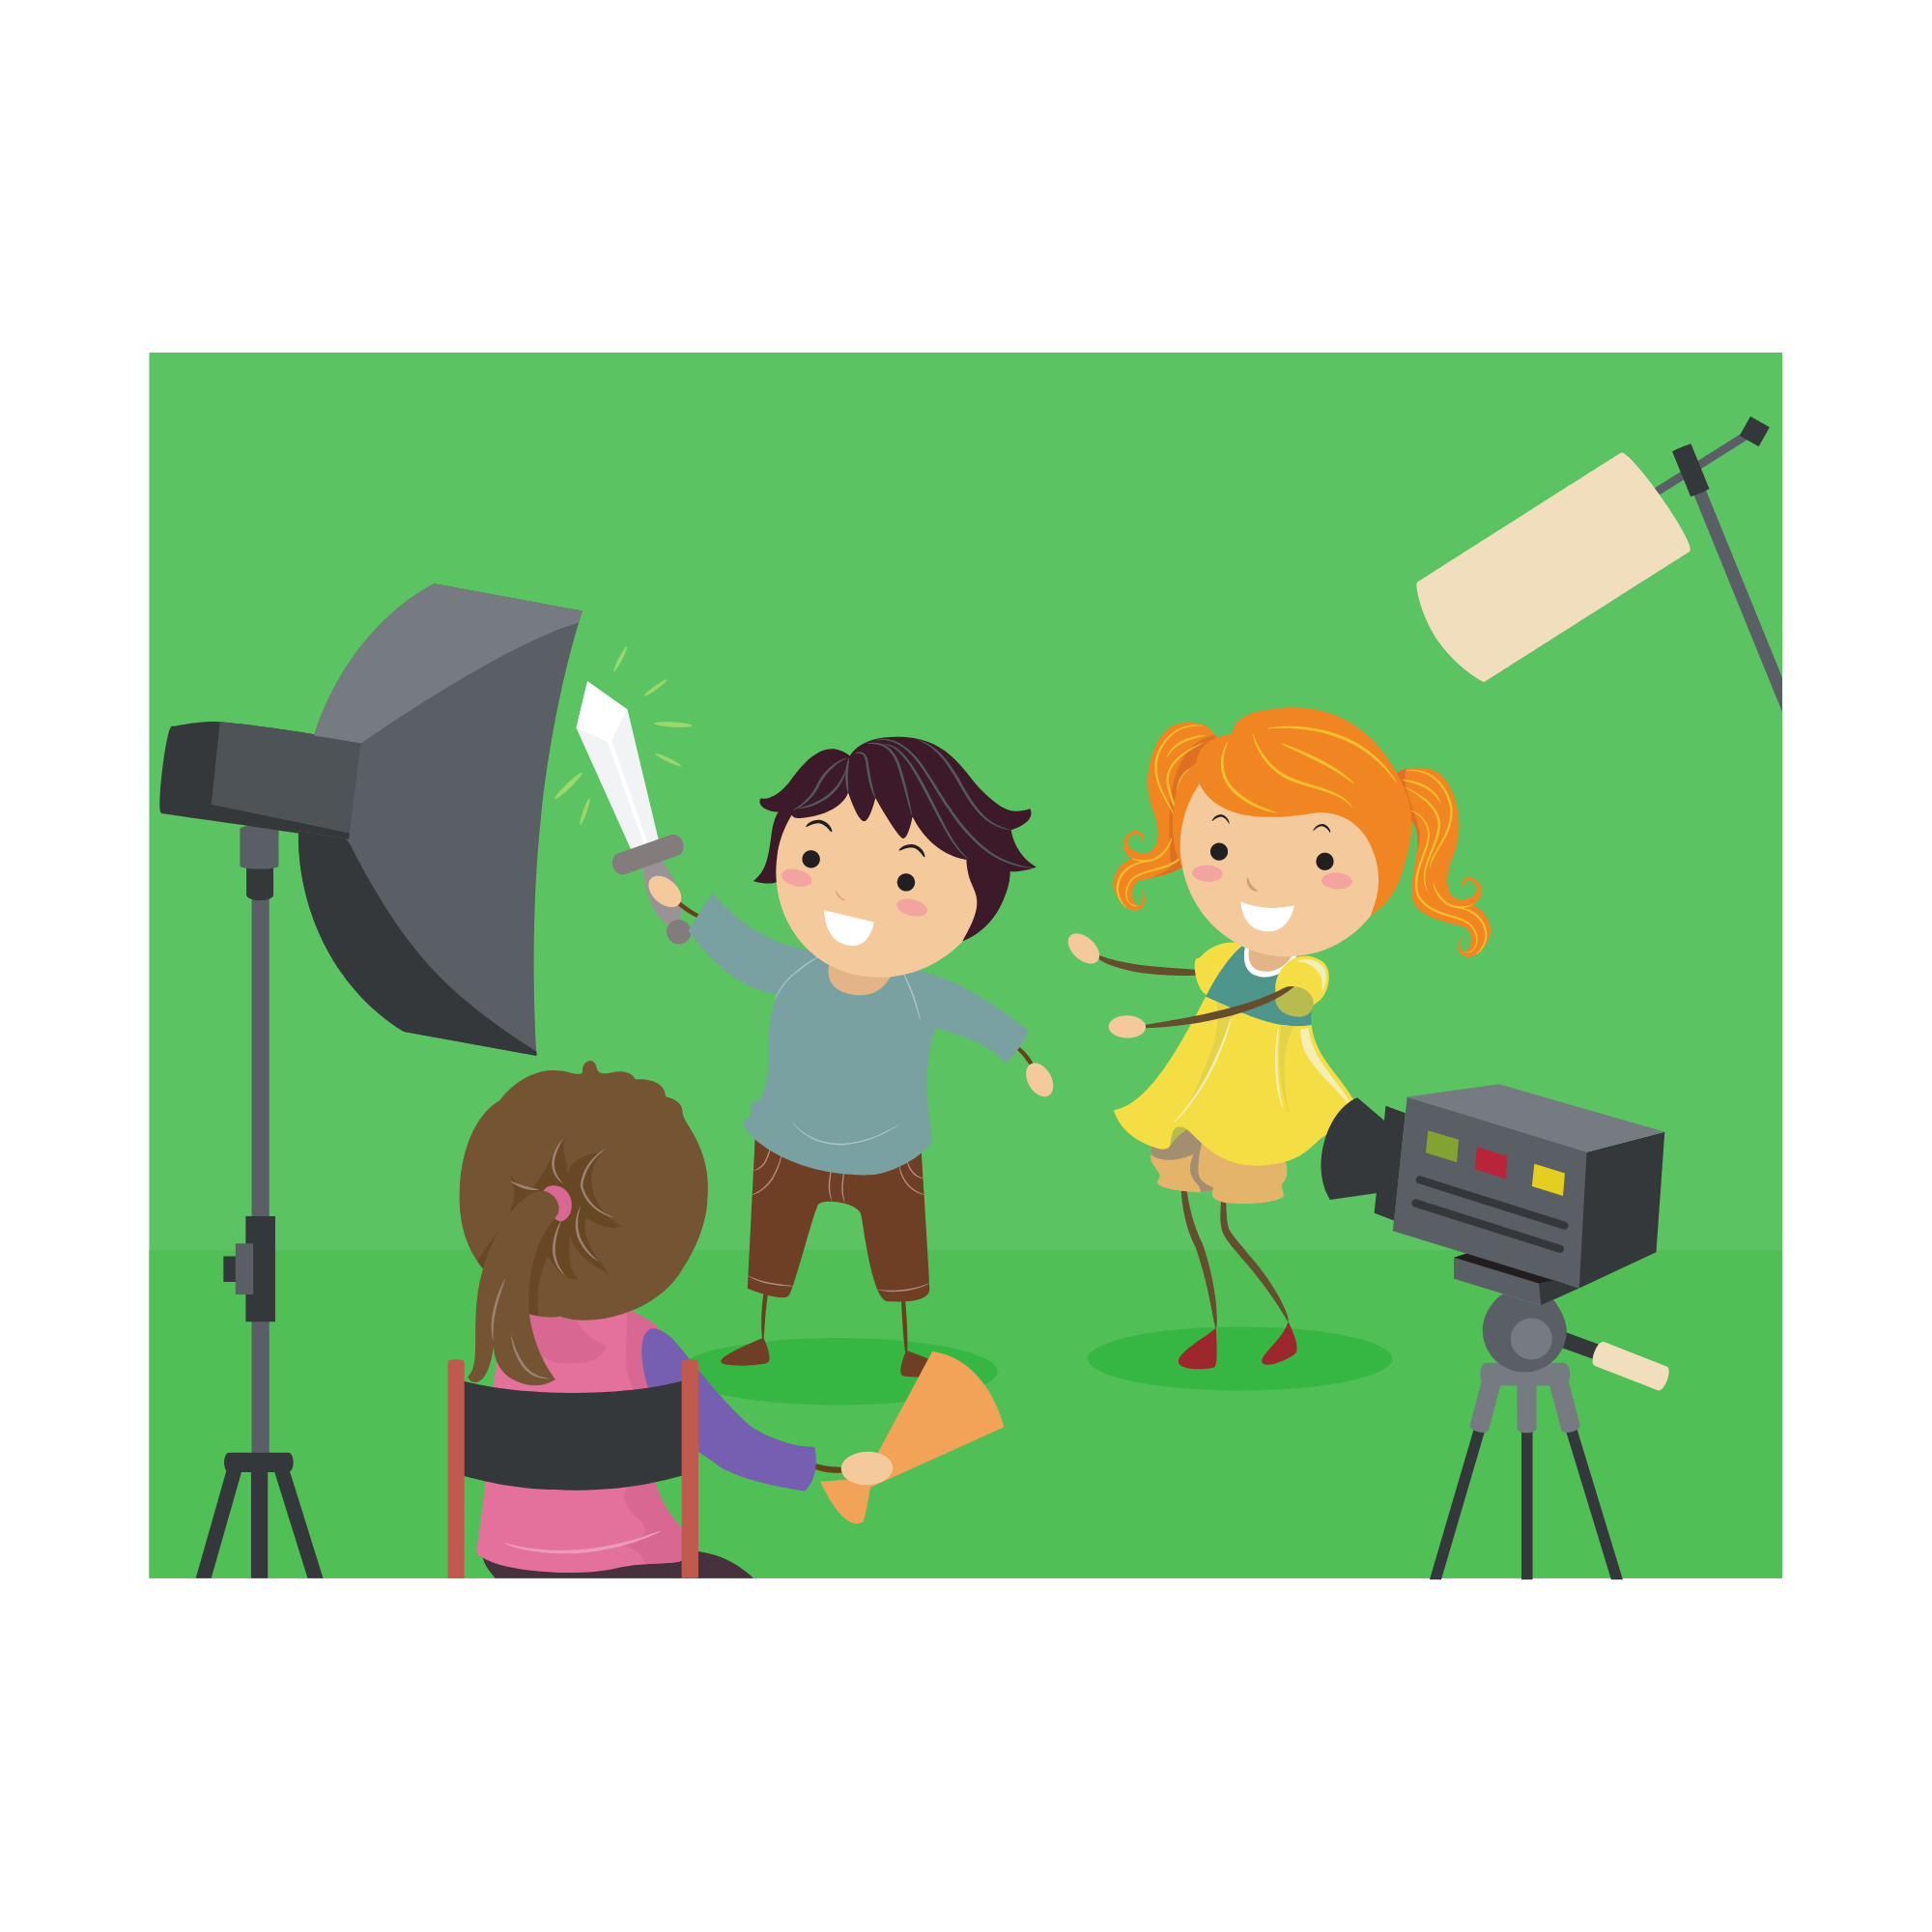 Cartoon of children with a green screen background